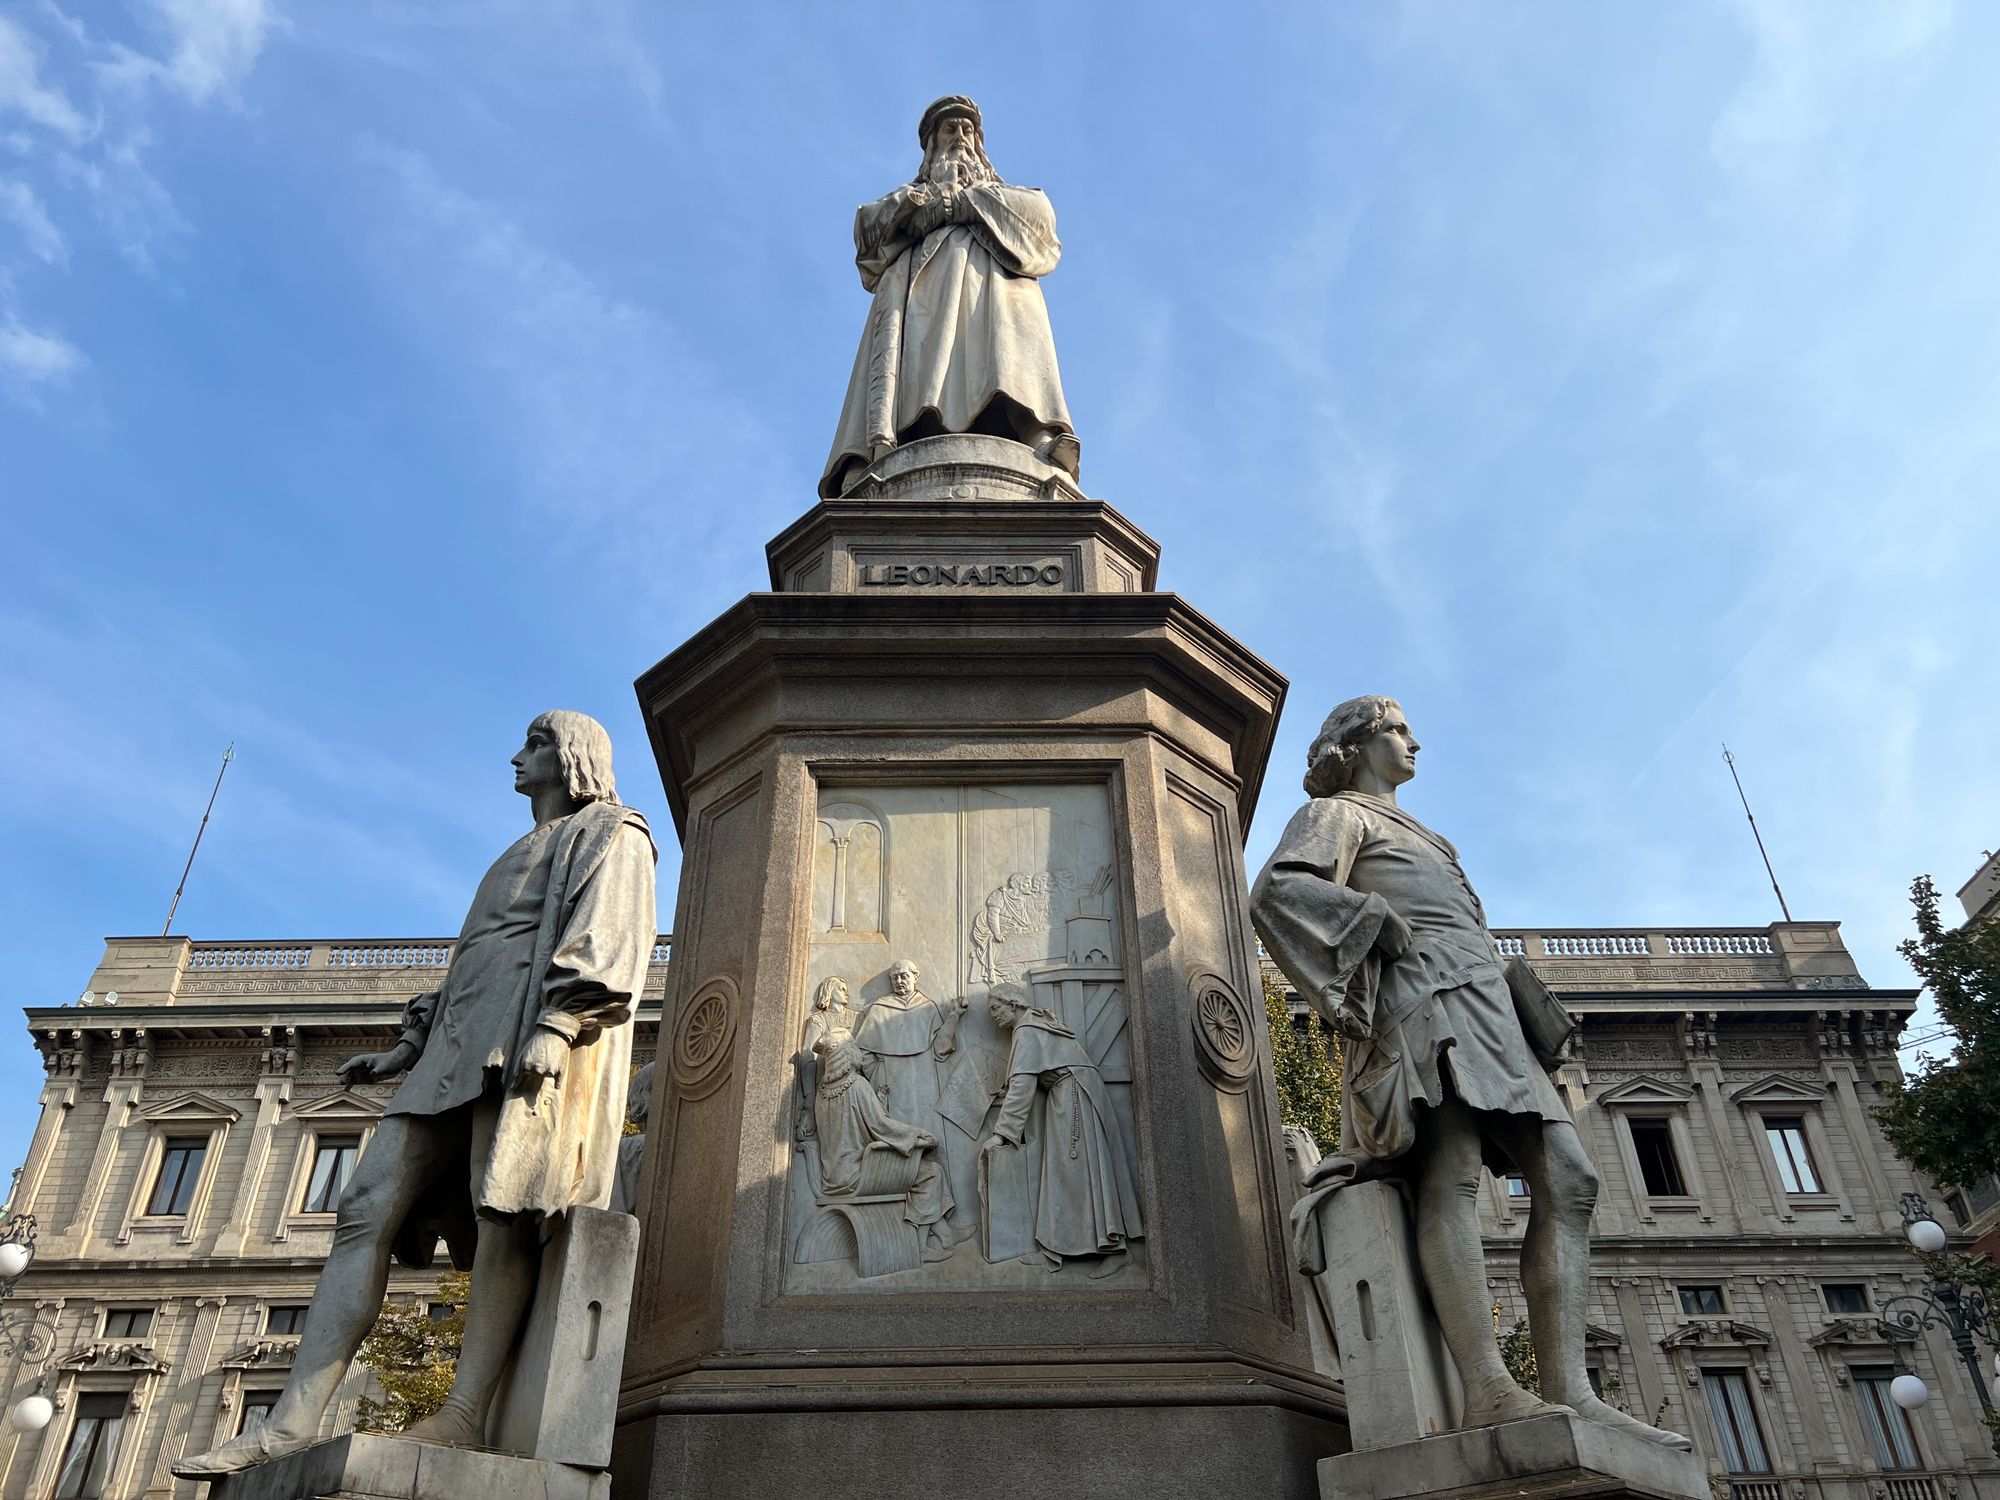 On a clear day, a statue of Leonardo da Vinci in a long robe, with men stood at all four corners and reliefs on each side of the plinth.